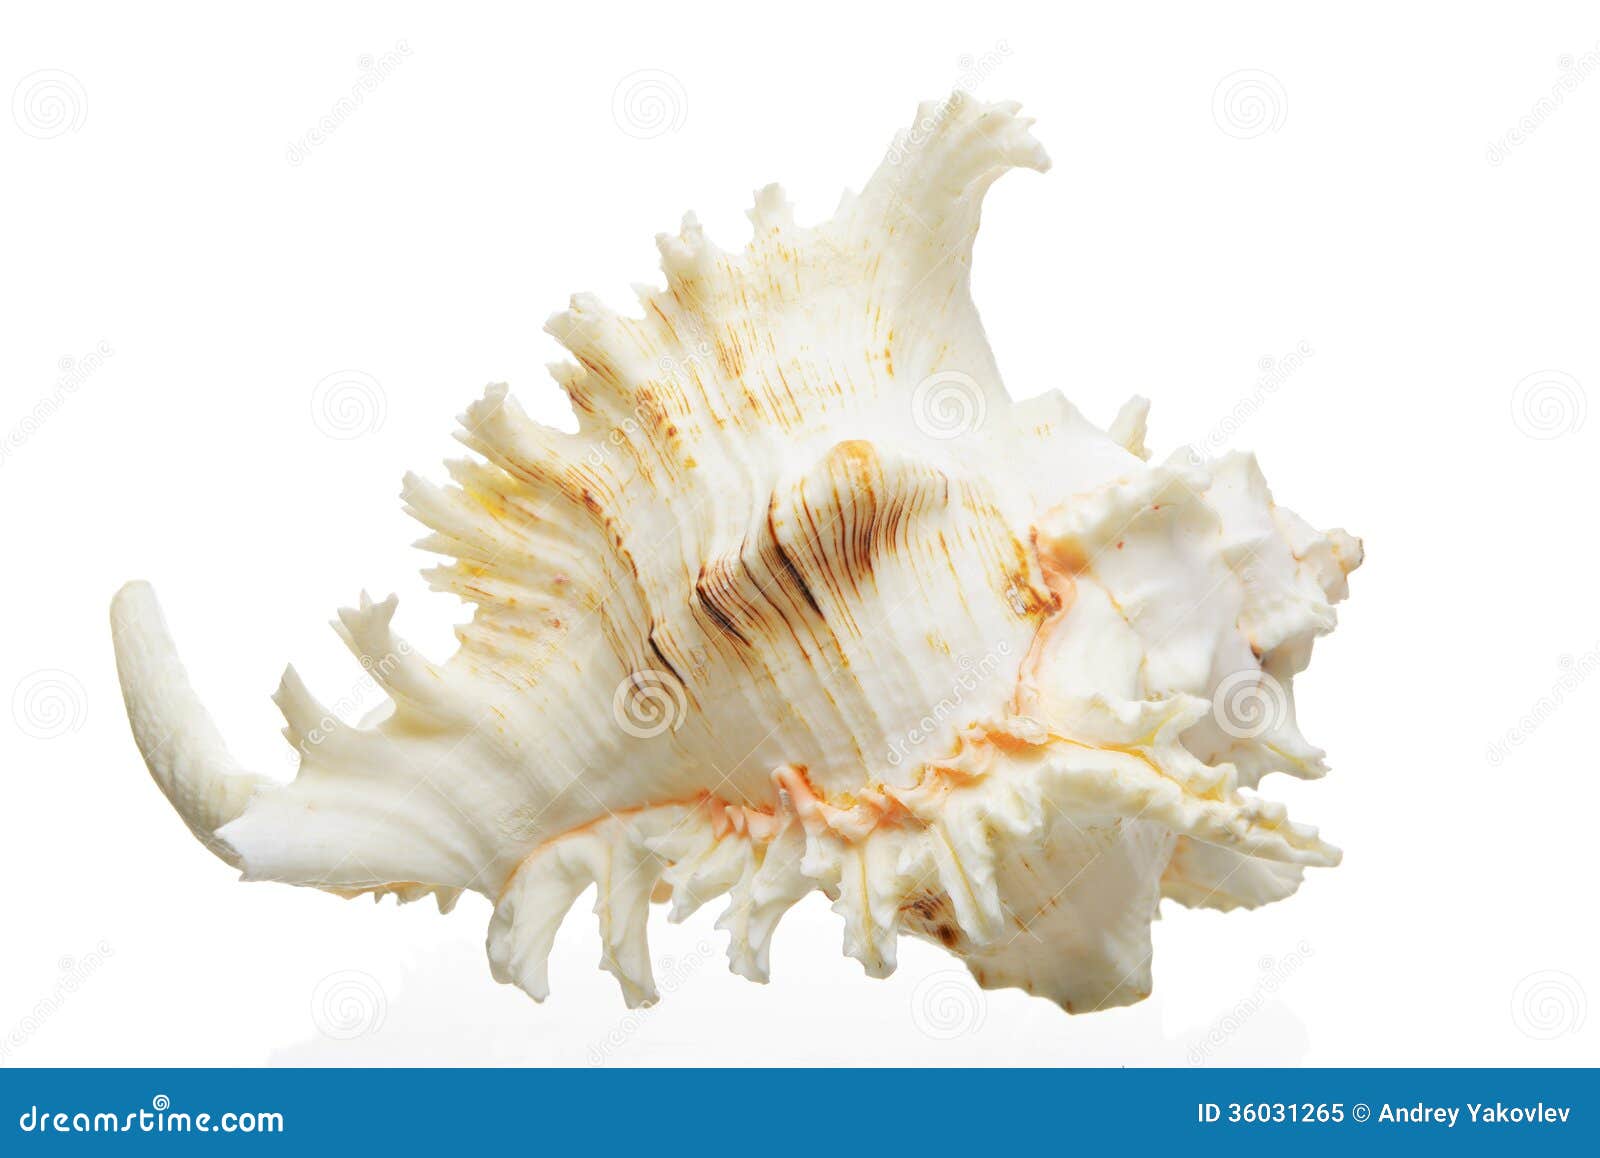 33+ Thousand Cockle Shell Royalty-Free Images, Stock Photos & Pictures